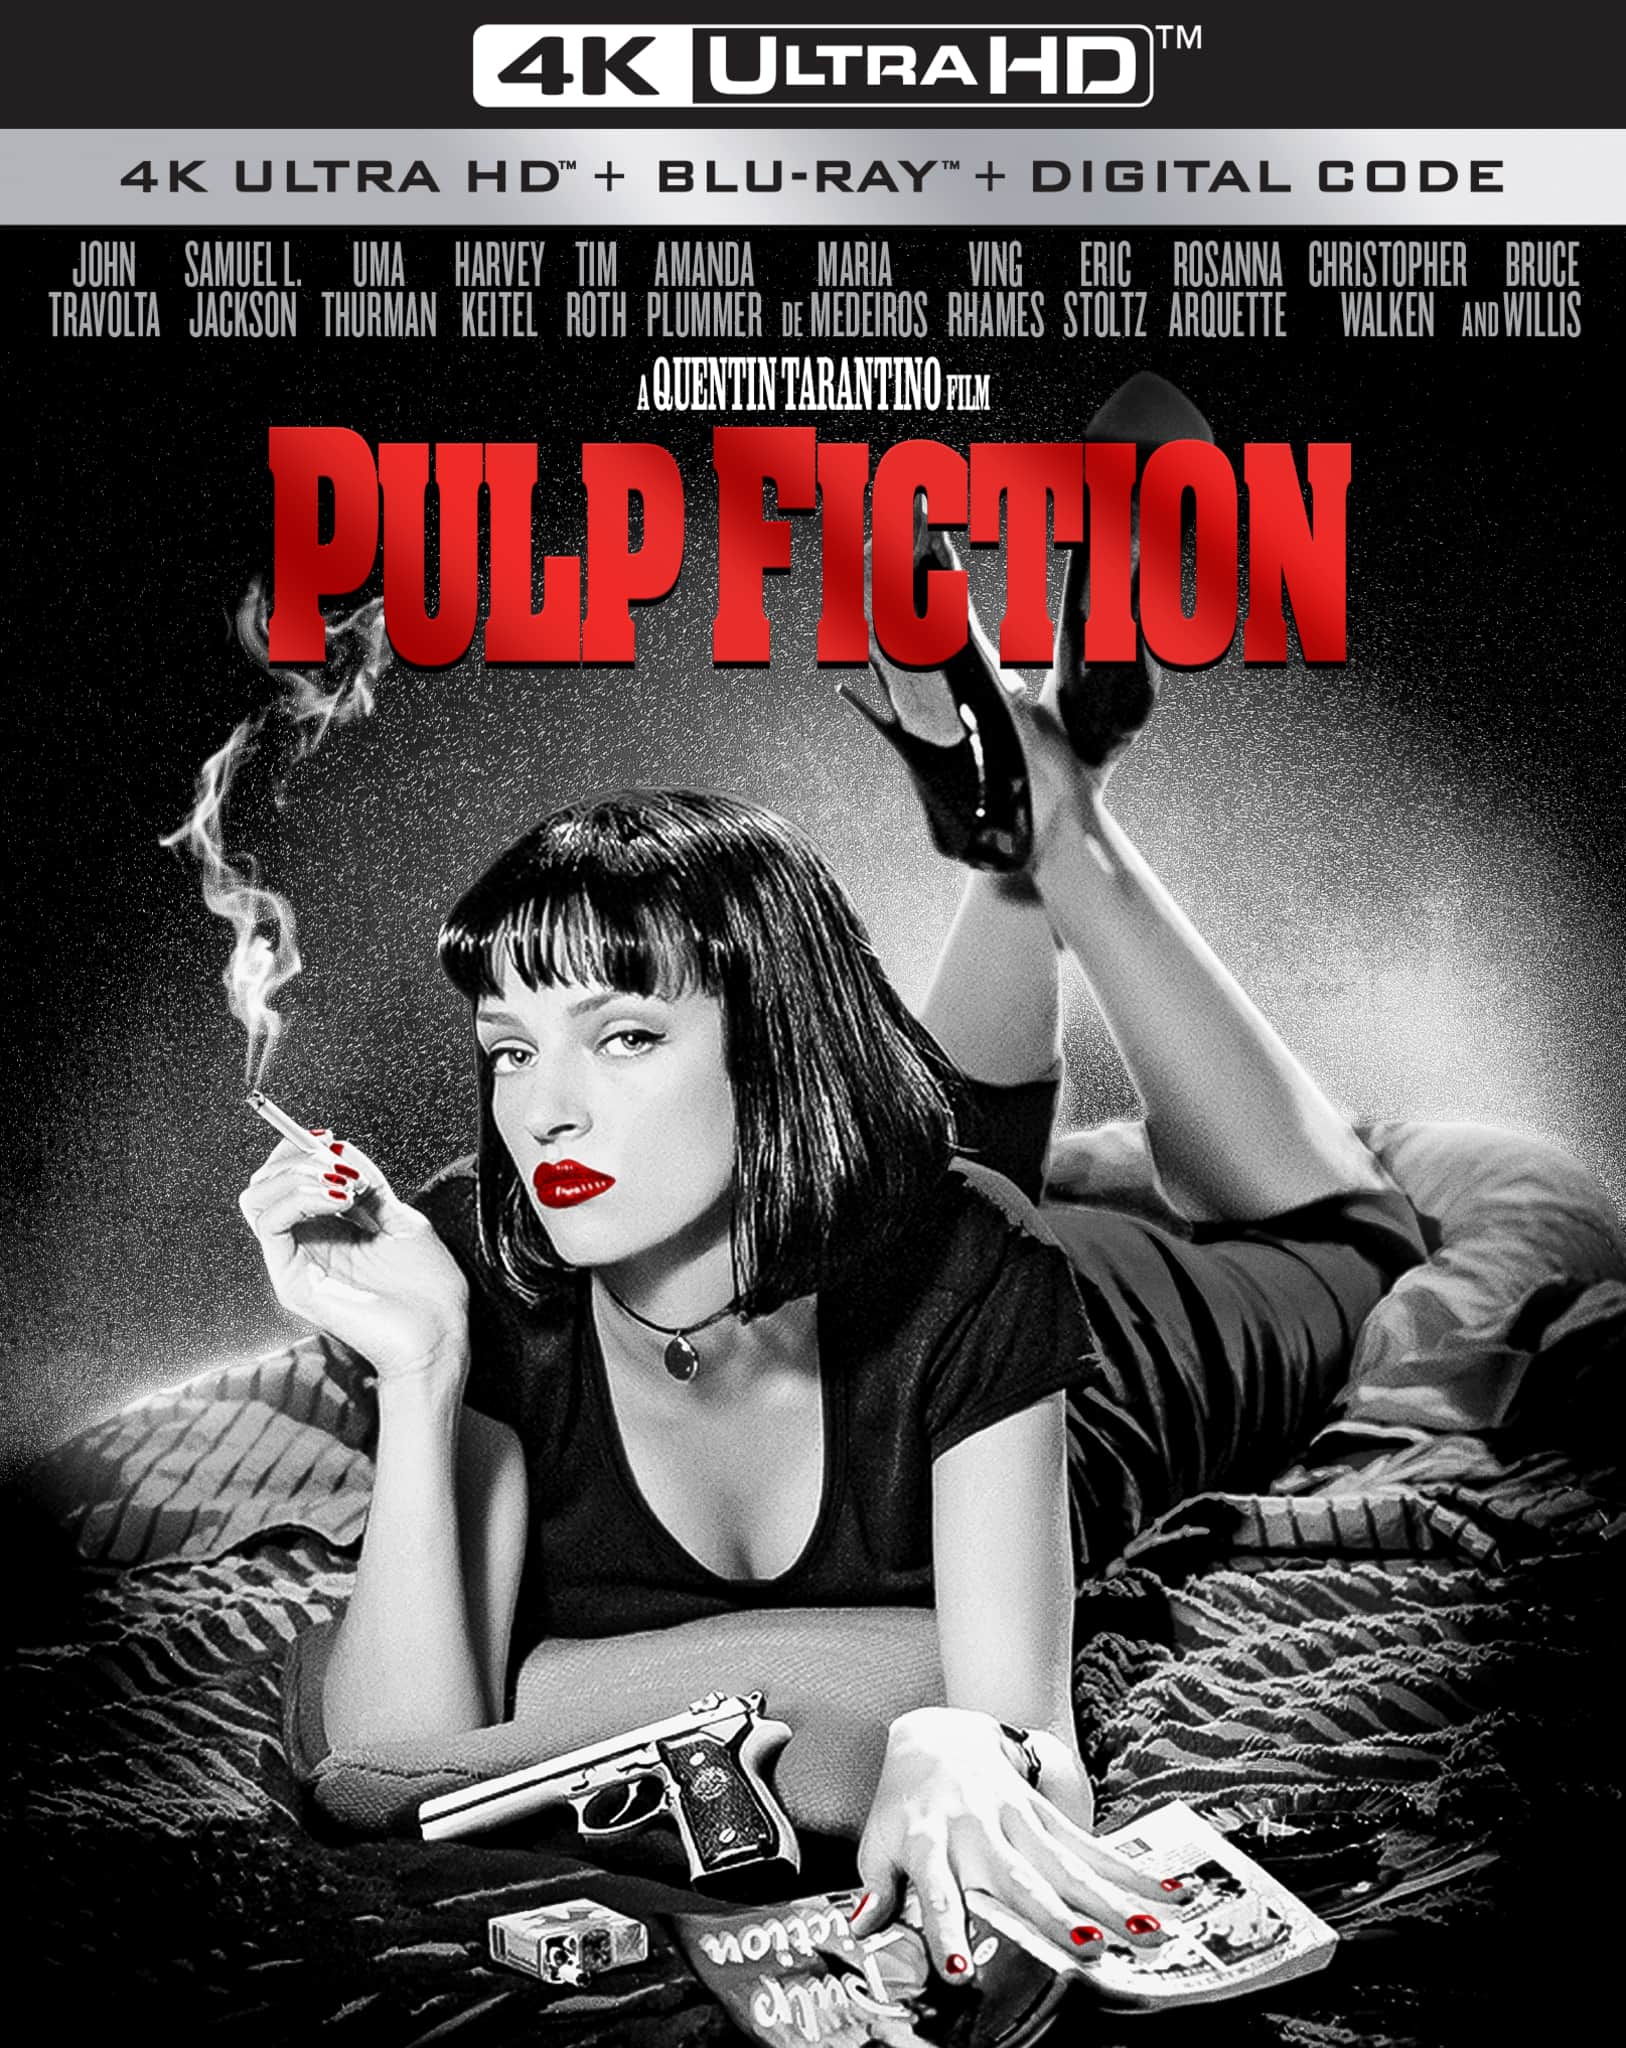 Pulp Fiction comes to 4K UHD on December 6th! 1